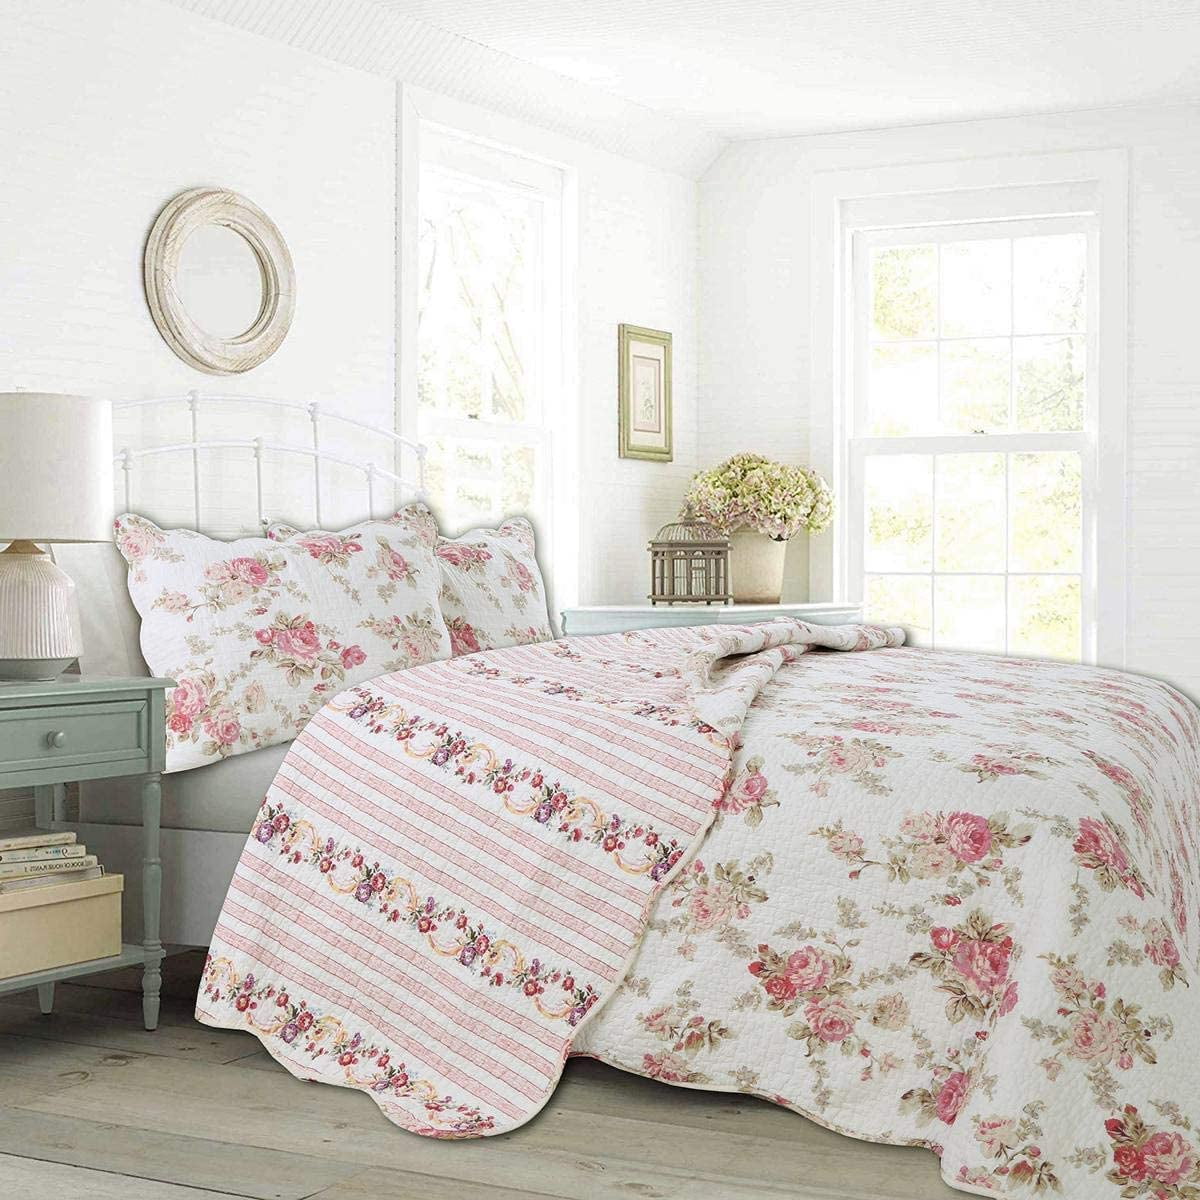 Details about   Shabby Chic Queen Sheet Set 